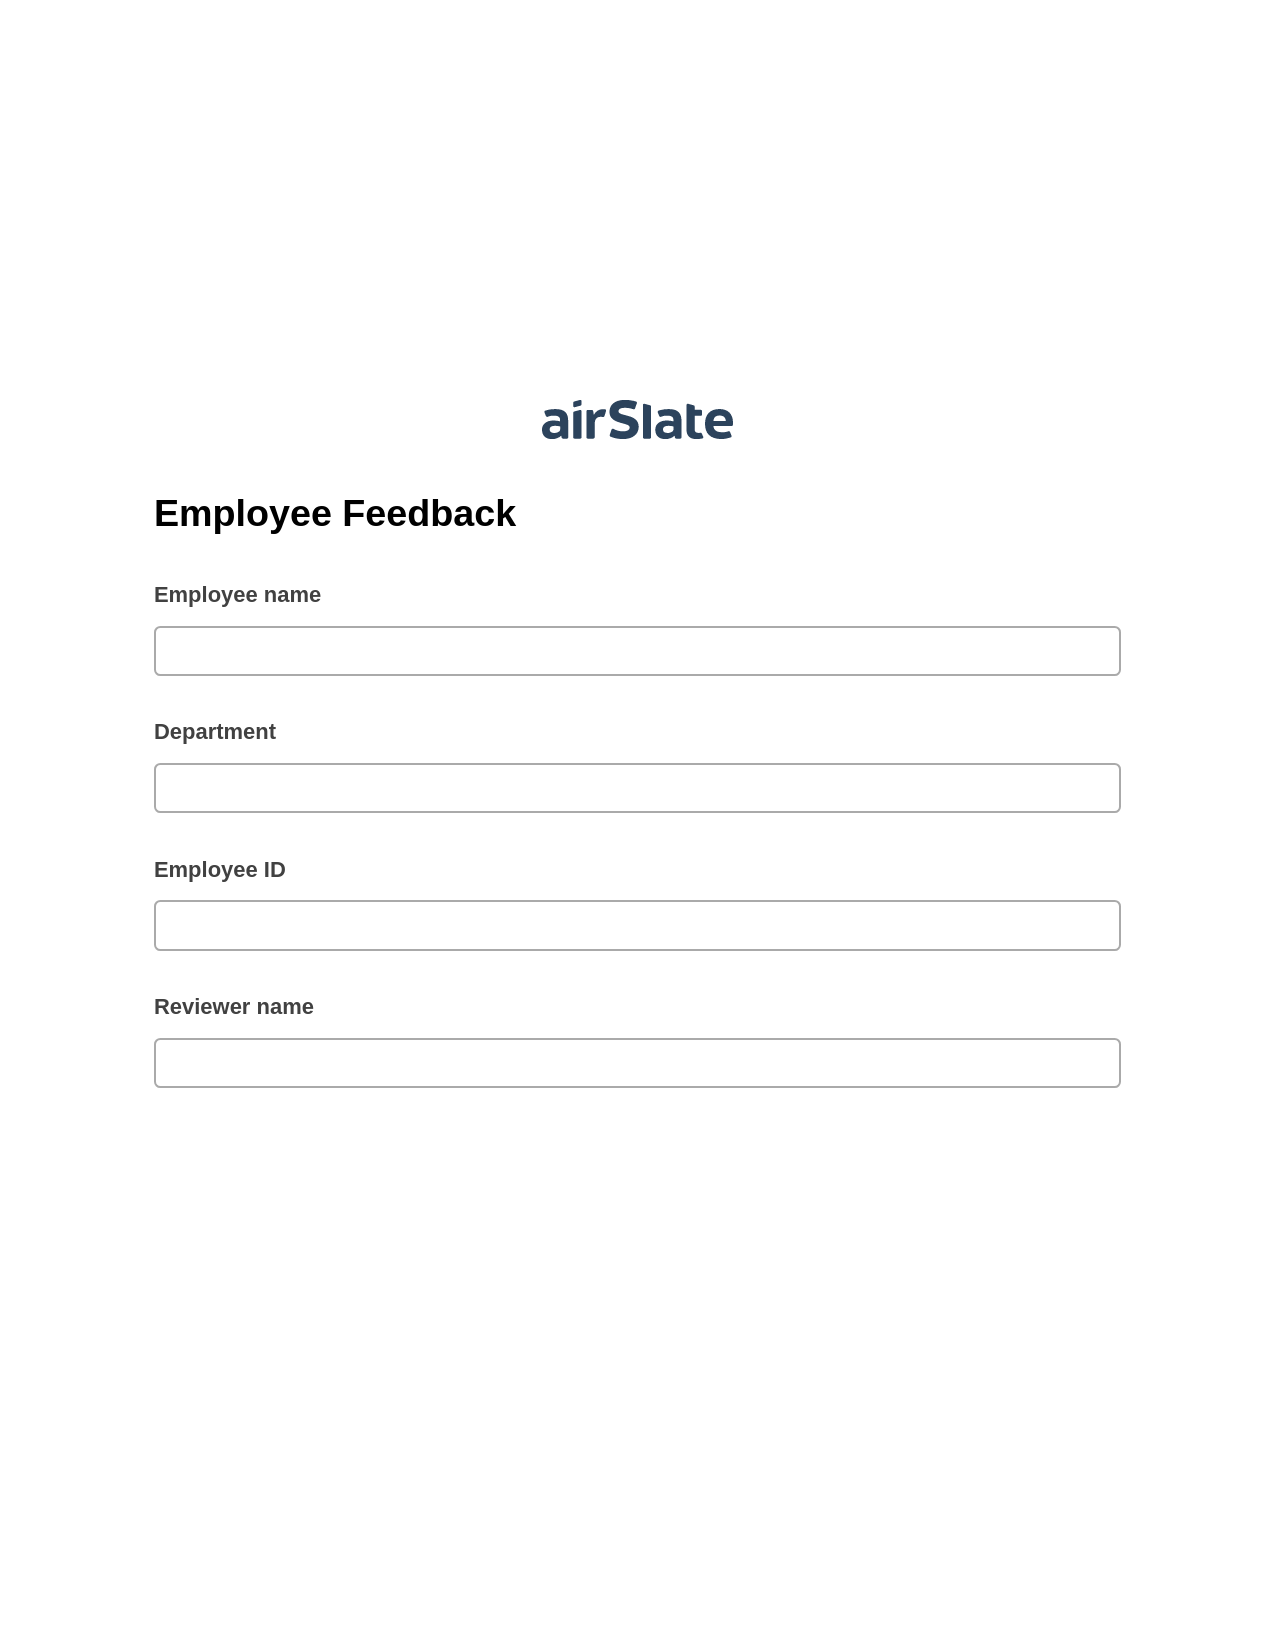 Employee Feedback Pre-fill Document Bot, Mailchimp send Campaign bot, Export to Google Sheet Bot